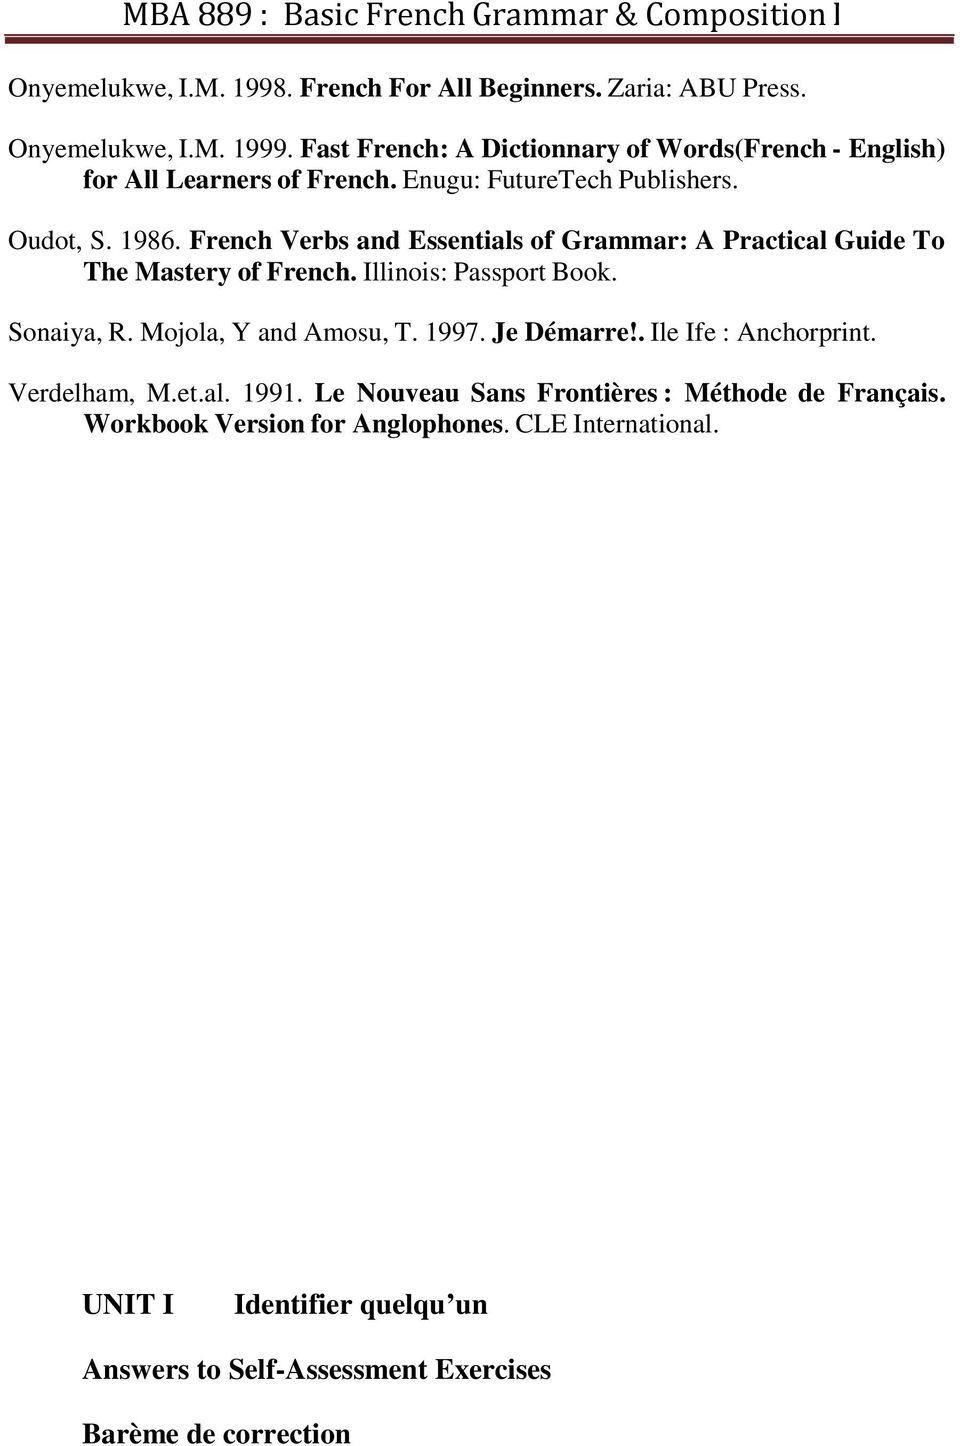 French Verbs and Essentials of Grammar: A Practical Guide To The Mastery of French. Illinois: Passport Book. Sonaiya, R. Mojola, Y and Amosu, T. 1997.